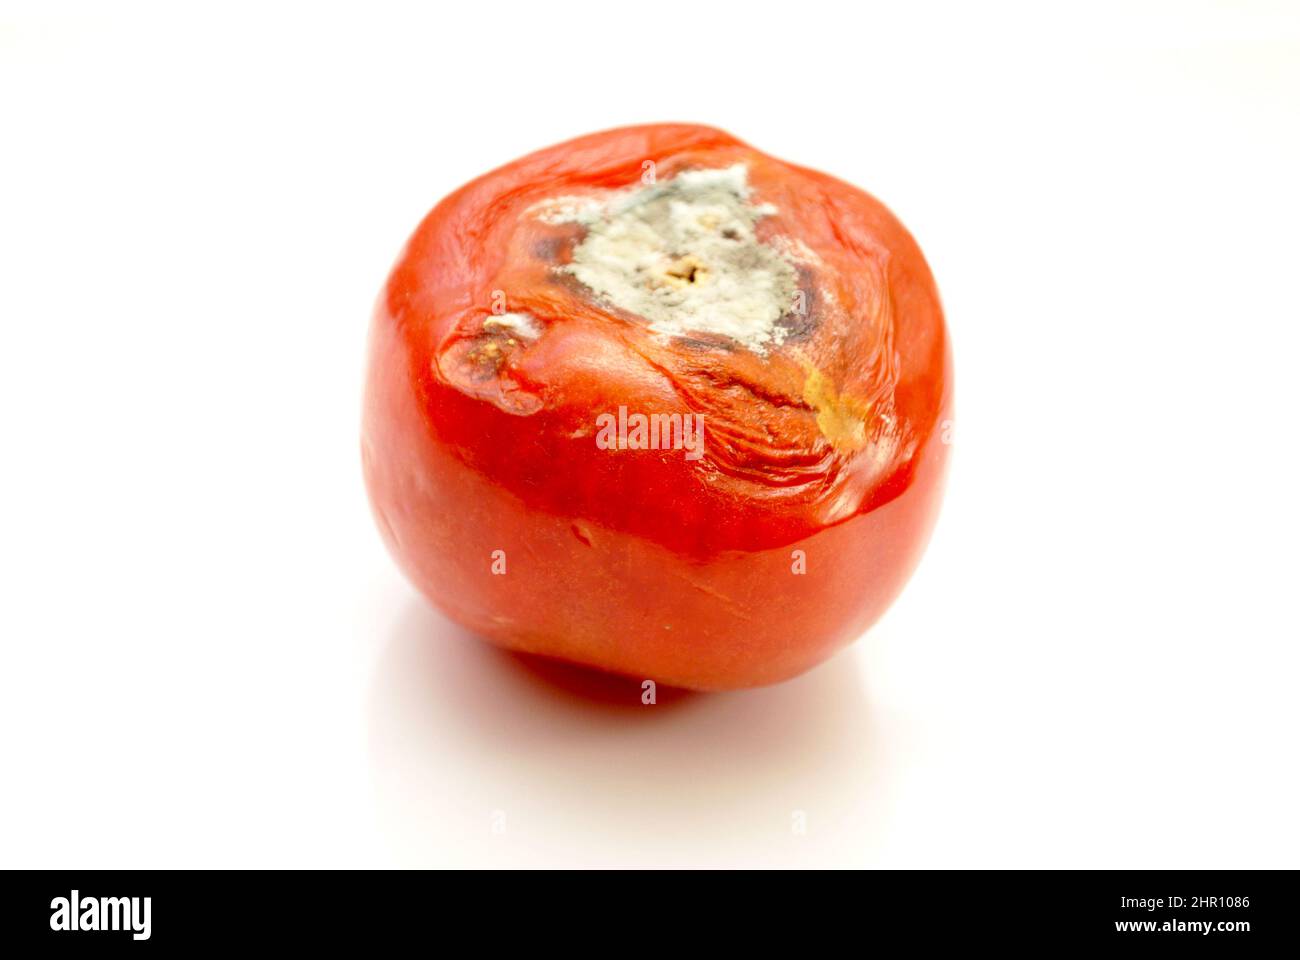 A Rotting Tomato with Mold Growing on Top Stock Photo